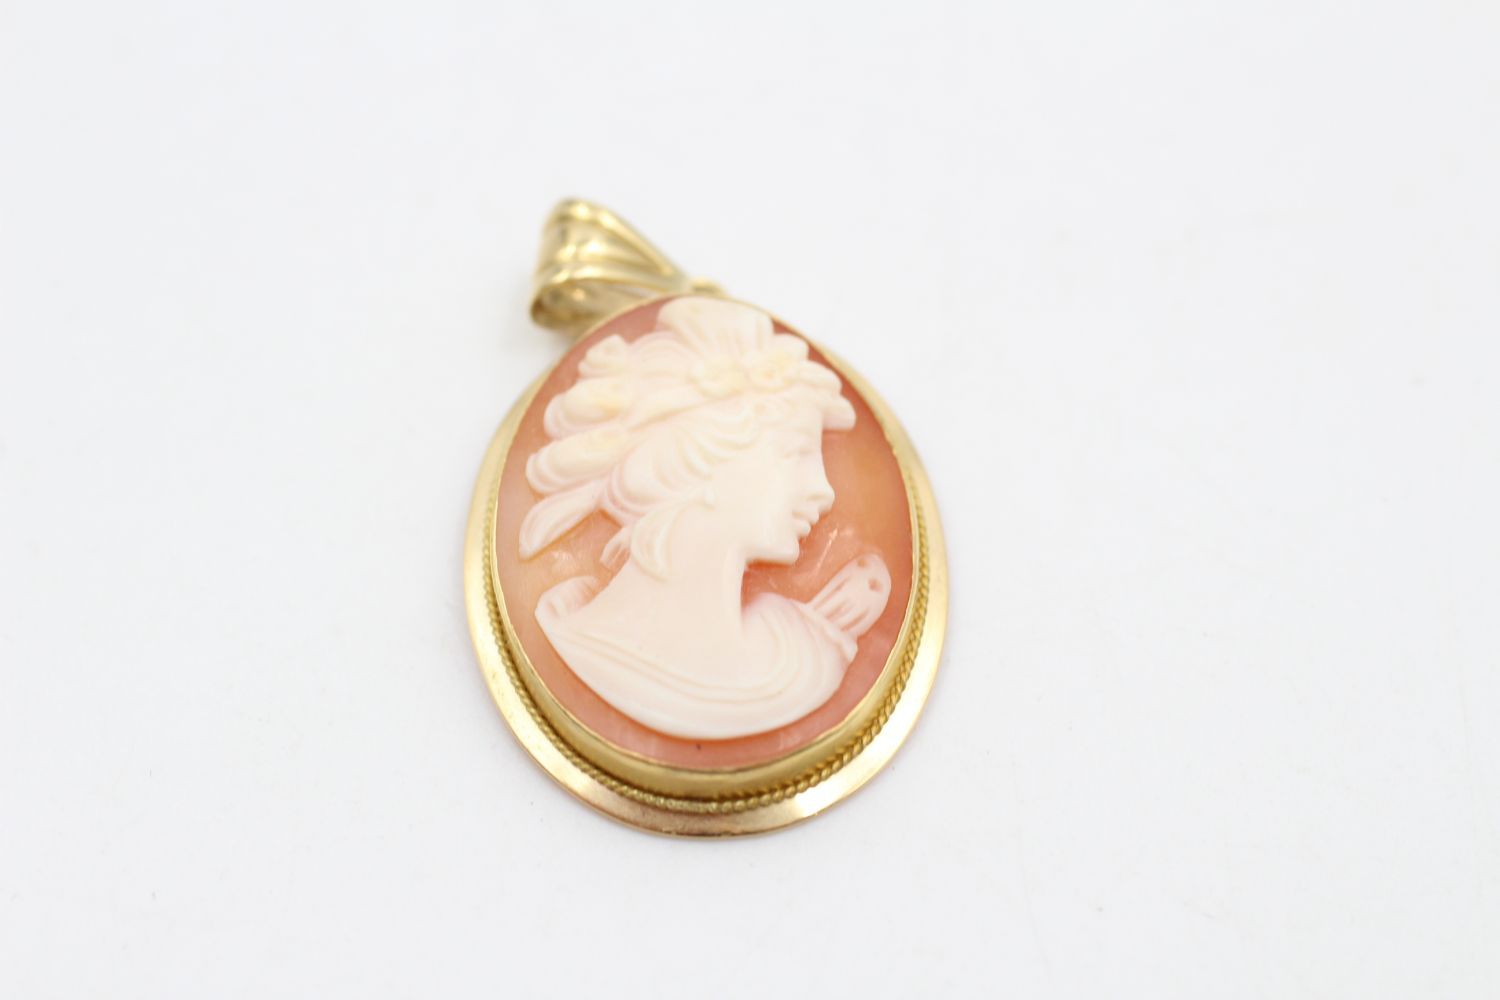 18ct Gold frame shell cameo brooch 4.6 grams gross - Image 2 of 4